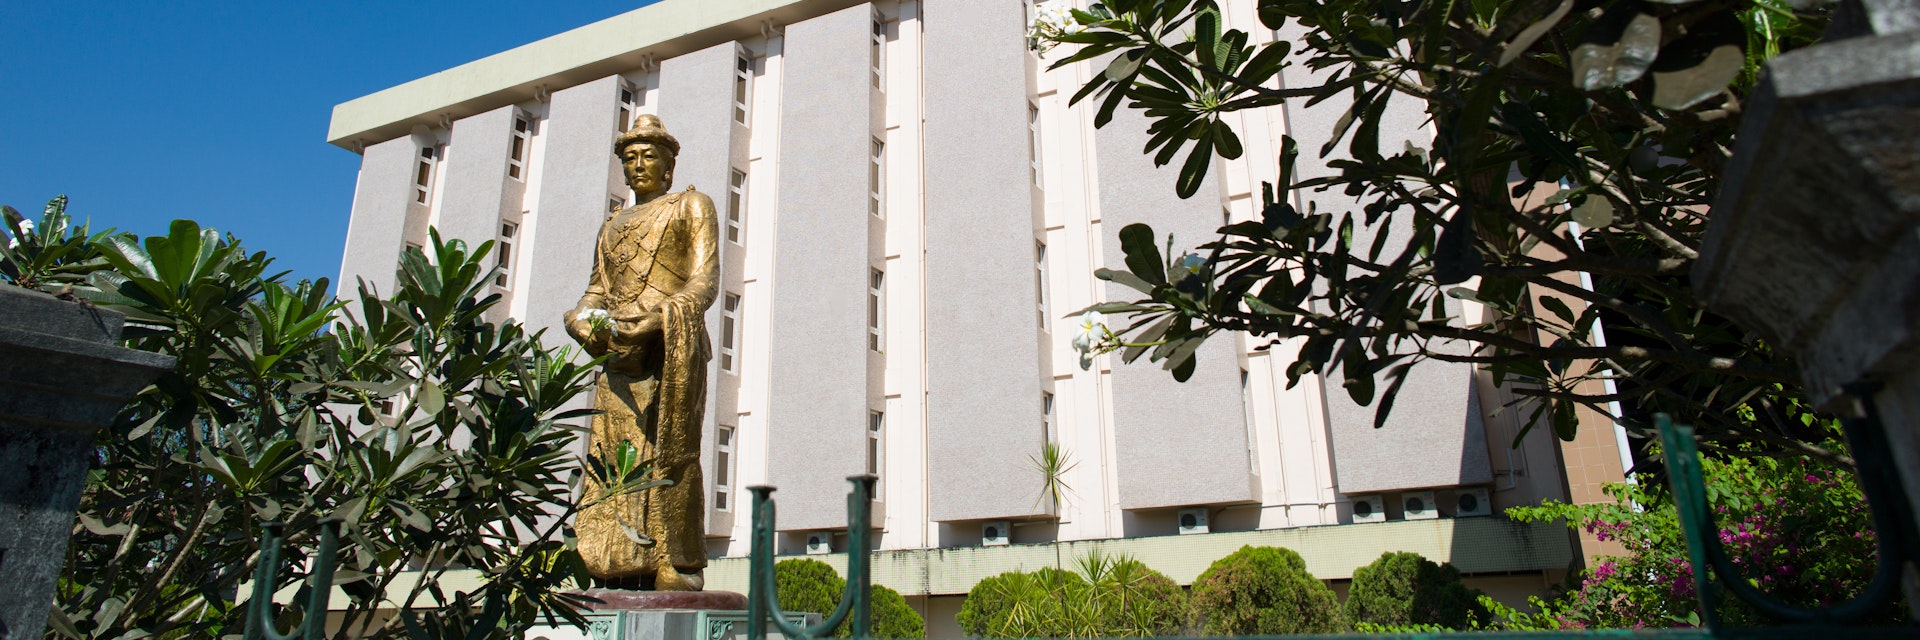 The statue of Statue of King Anawratha and the exterior of National Museum of Myanmar.